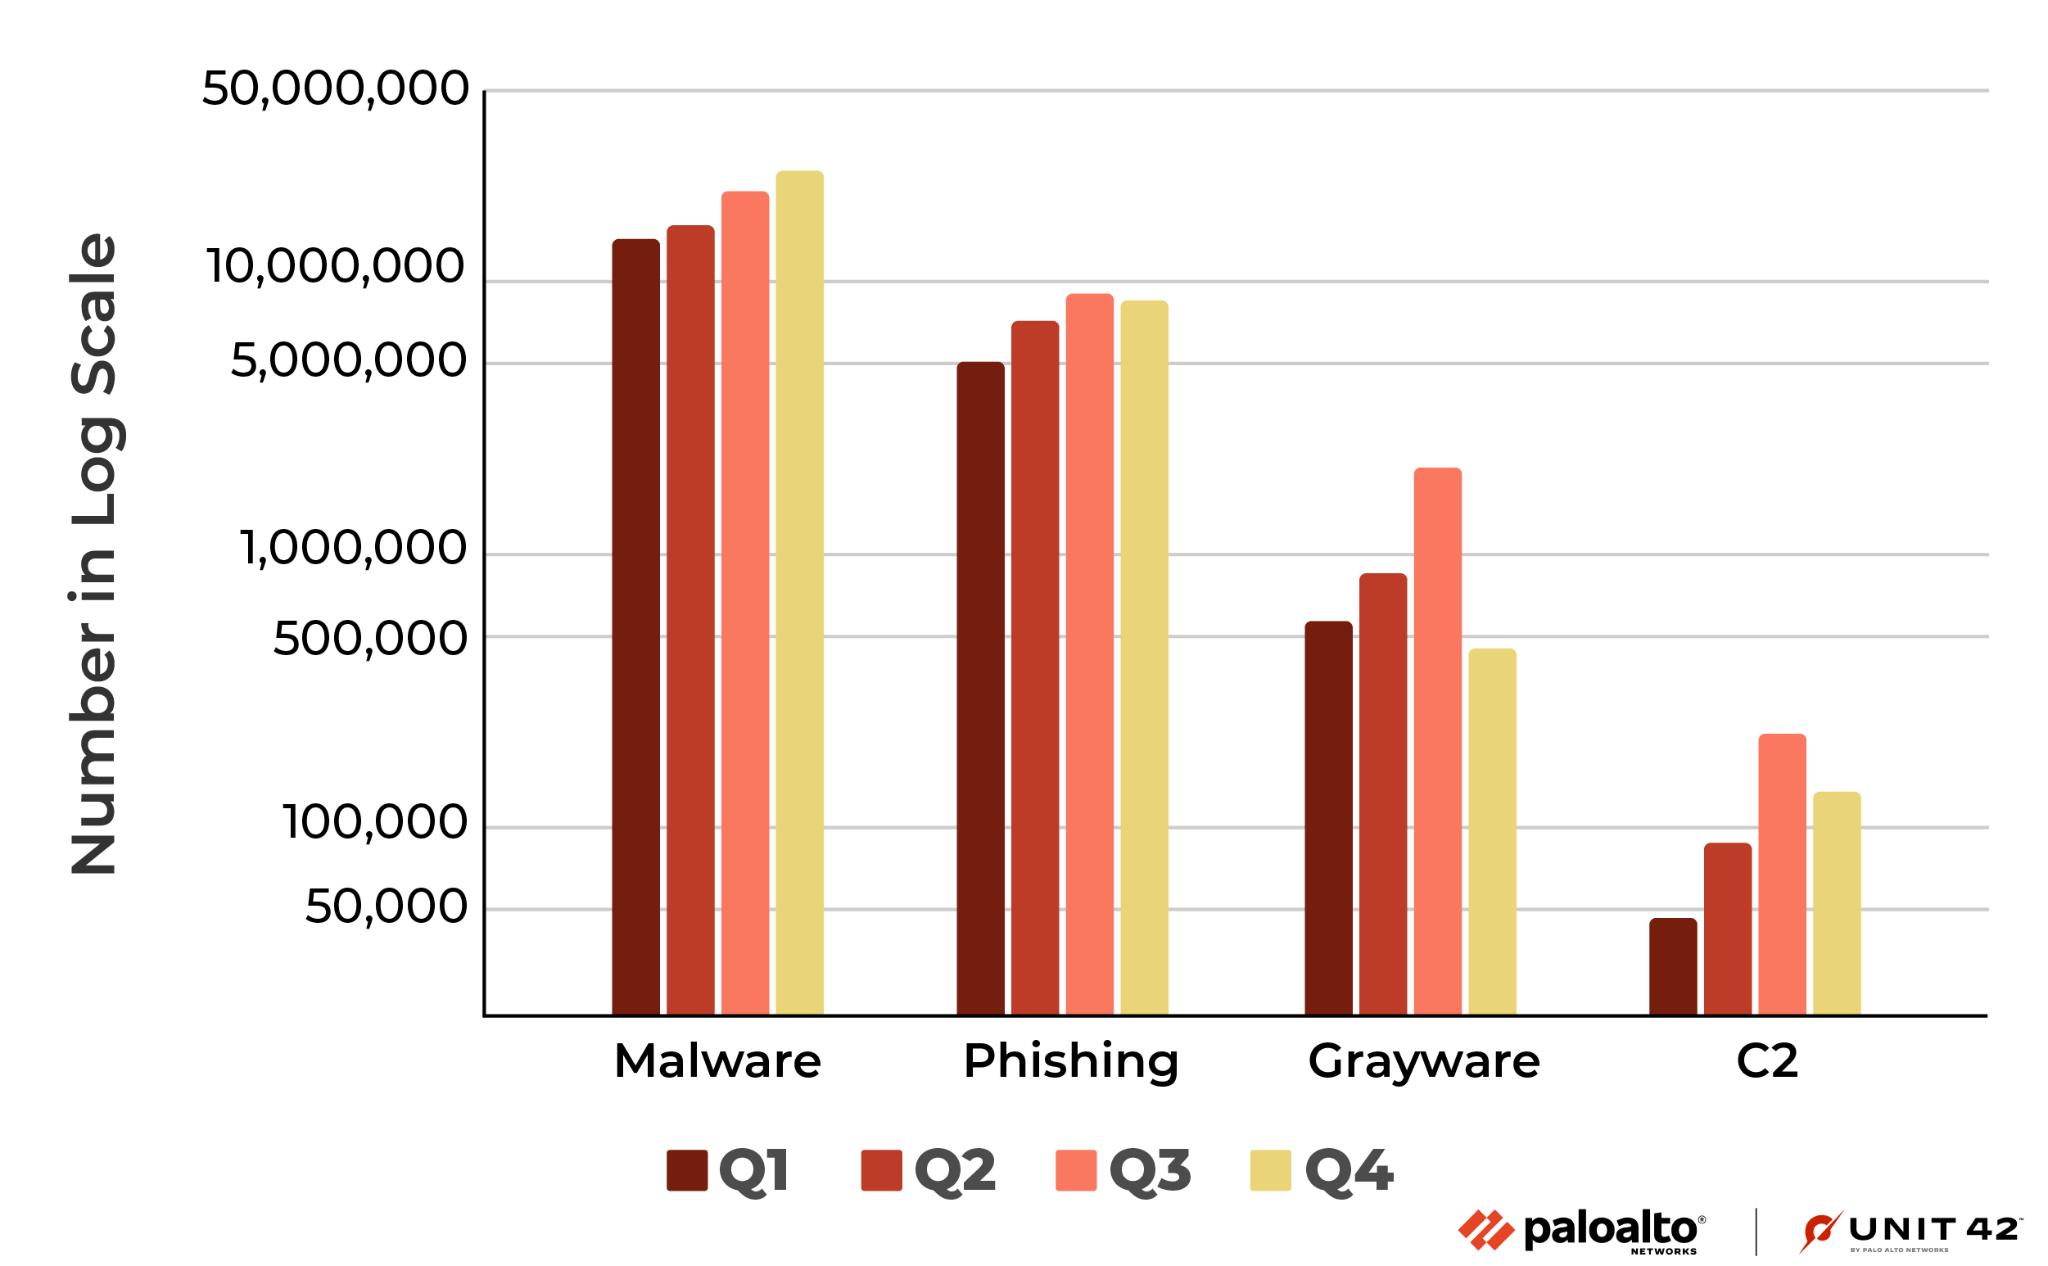 Image 2 is a column chart showing the amount (in log scale) of newly observed malicious URLs from quarter 1 to quarter 4 in 2022. It compares malware, phishing, grayware, and command and control over these four quarters. The largest numbers are malware and the smallest are C2.